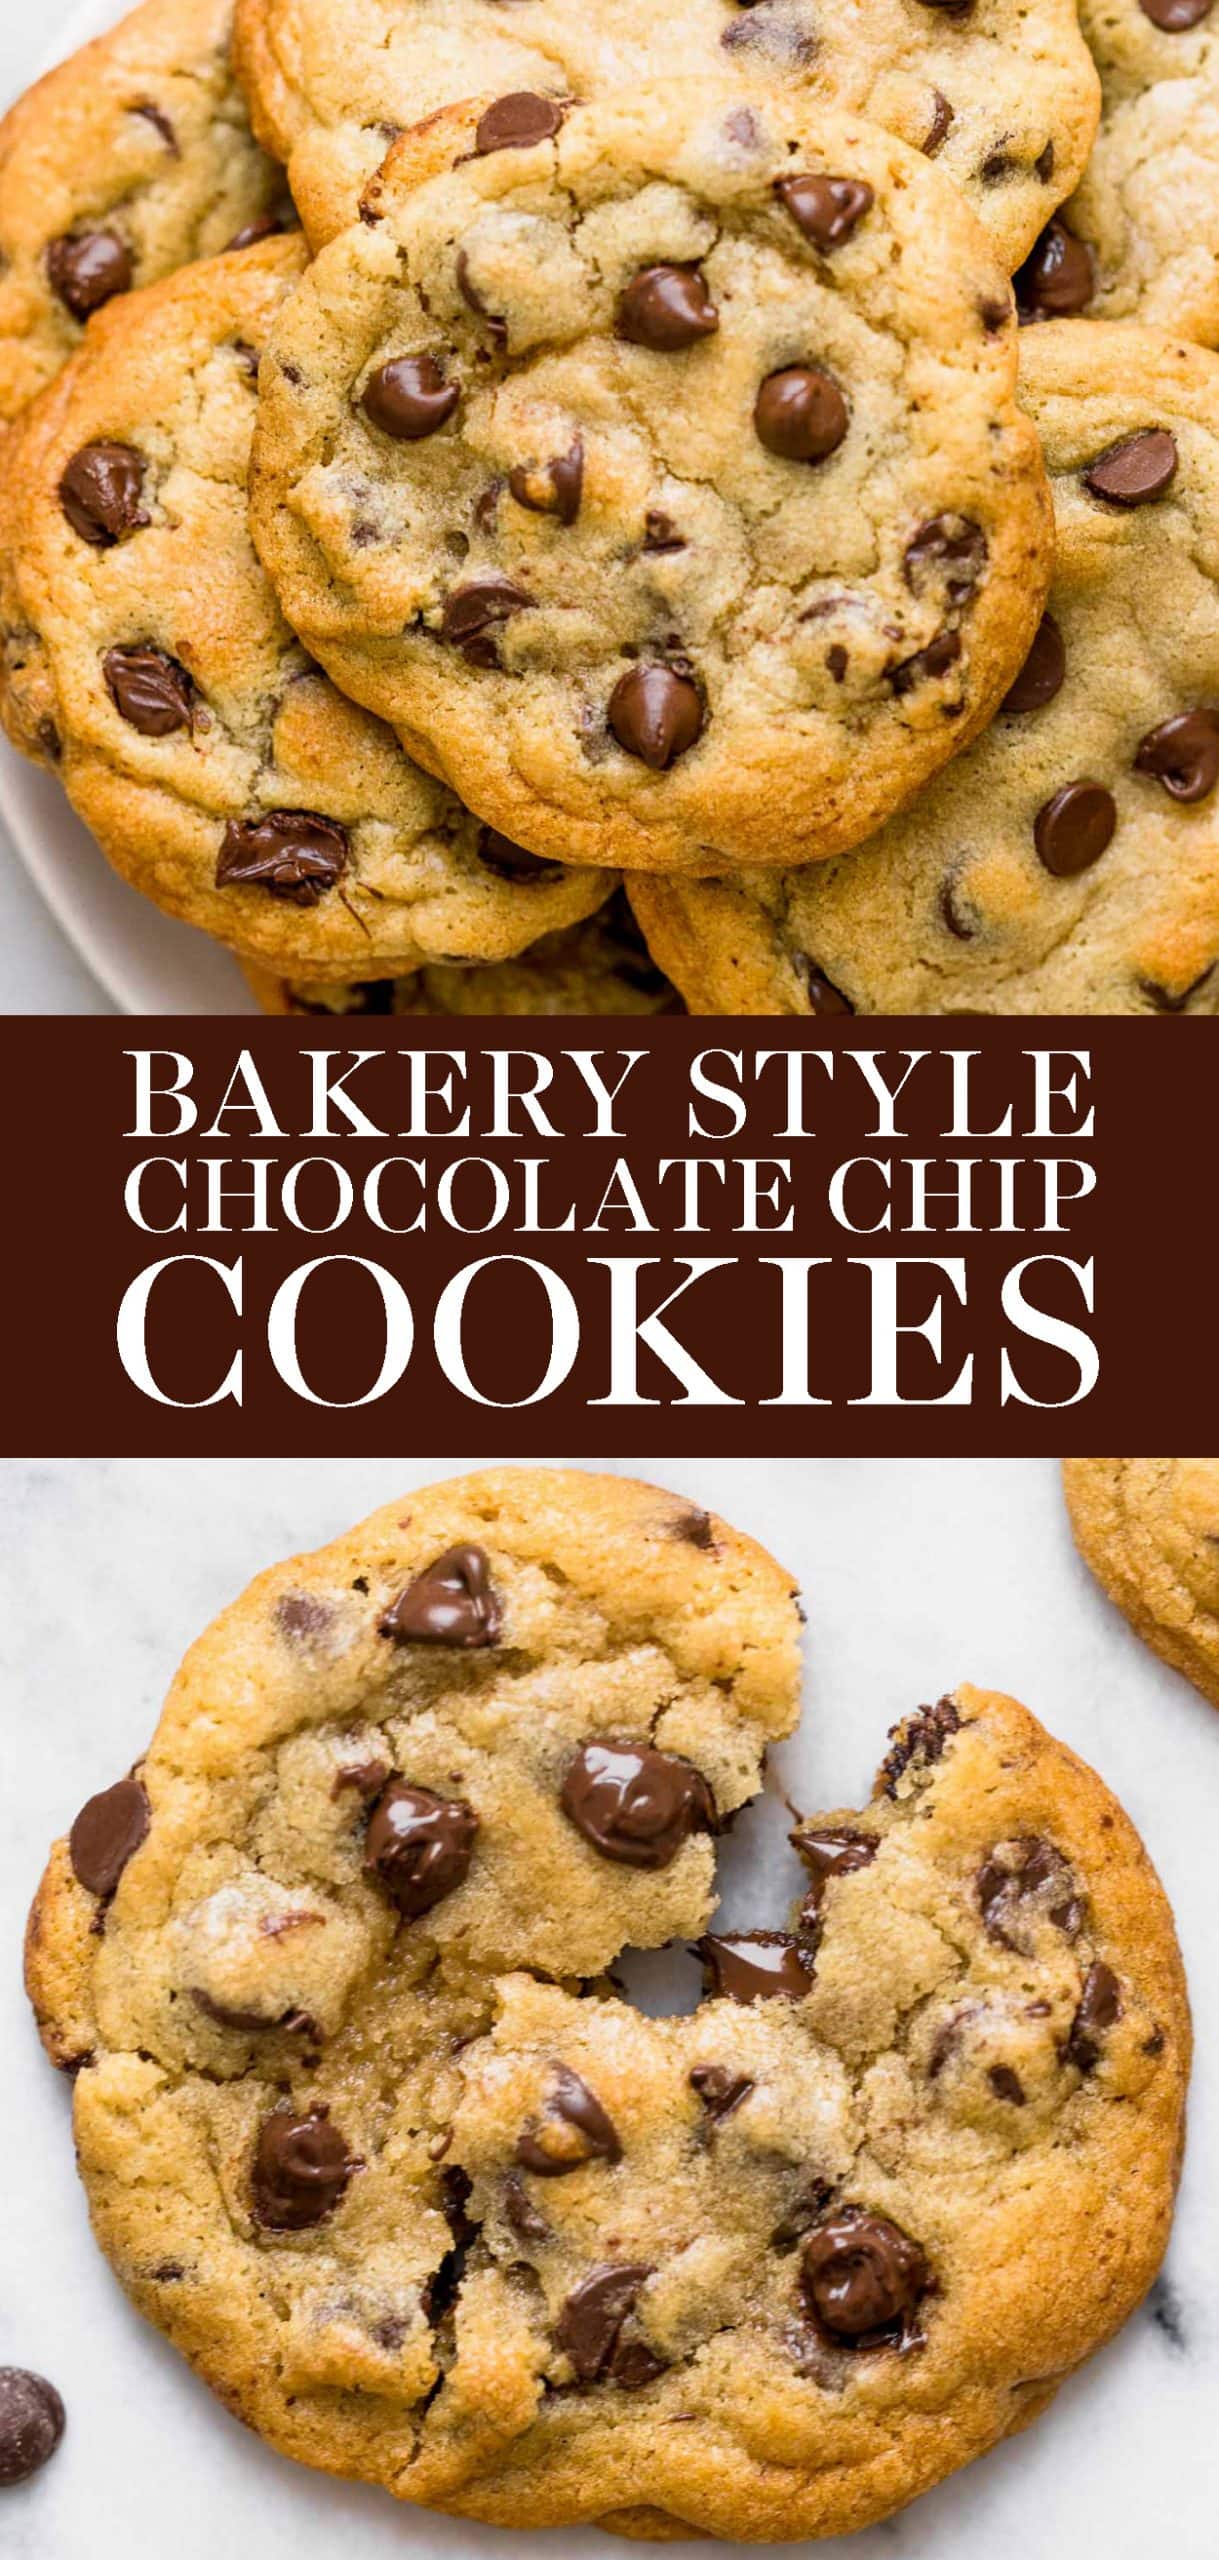 Best Bakery Style Chocolate Chip Cookies Recipe | Handle the Heat